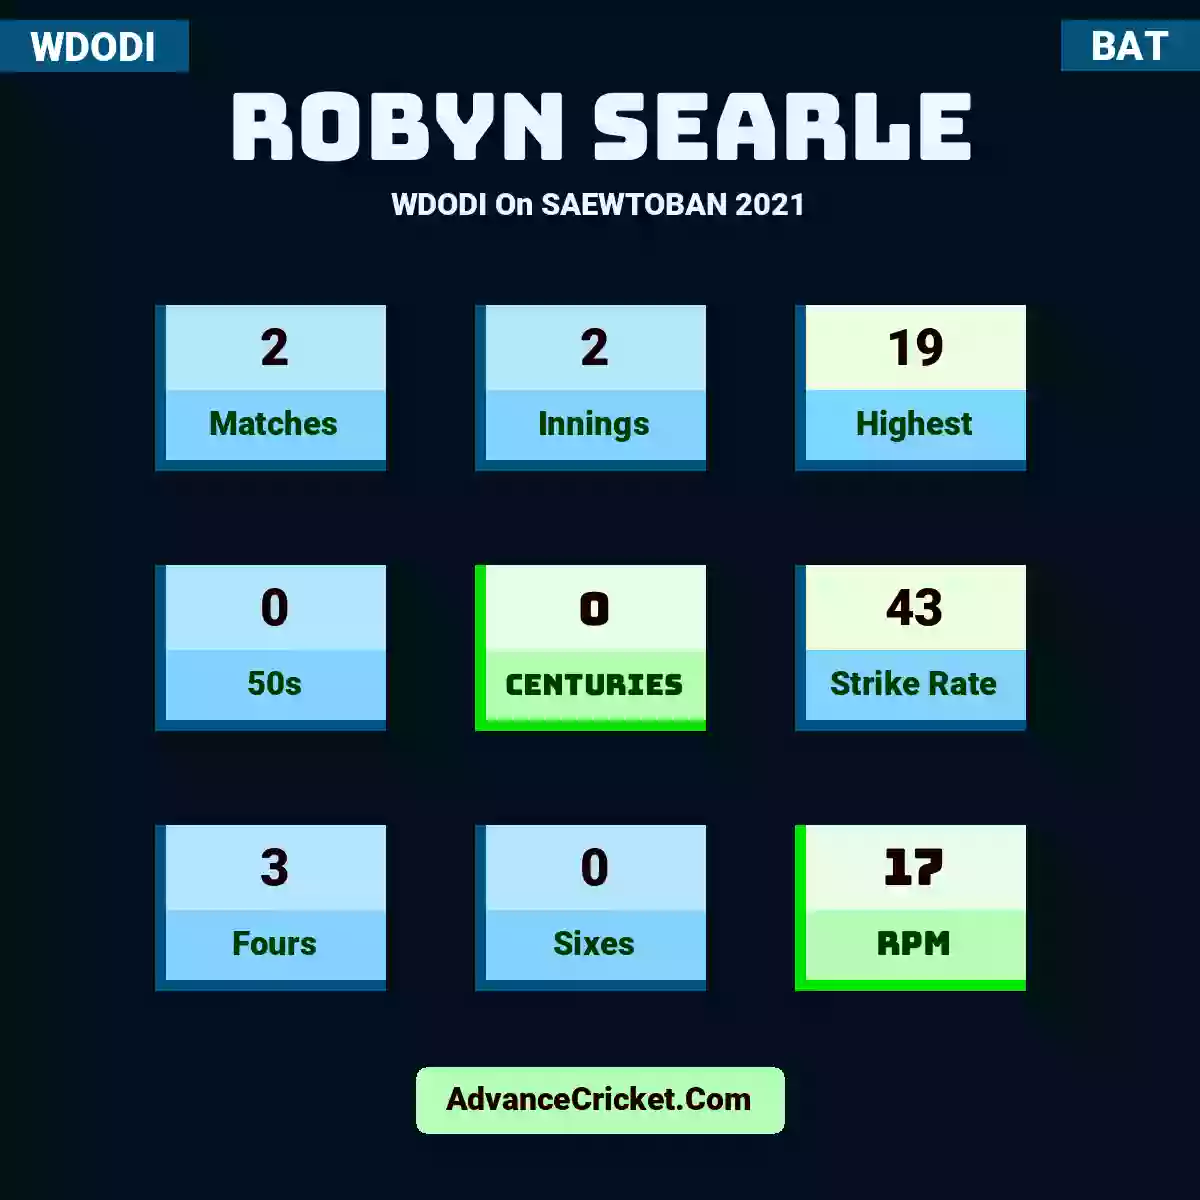 Robyn Searle WDODI  On SAEWTOBAN 2021, Robyn Searle played 2 matches, scored 19 runs as highest, 0 half-centuries, and 0 centuries, with a strike rate of 43. R.Searle hit 3 fours and 0 sixes, with an RPM of 17.